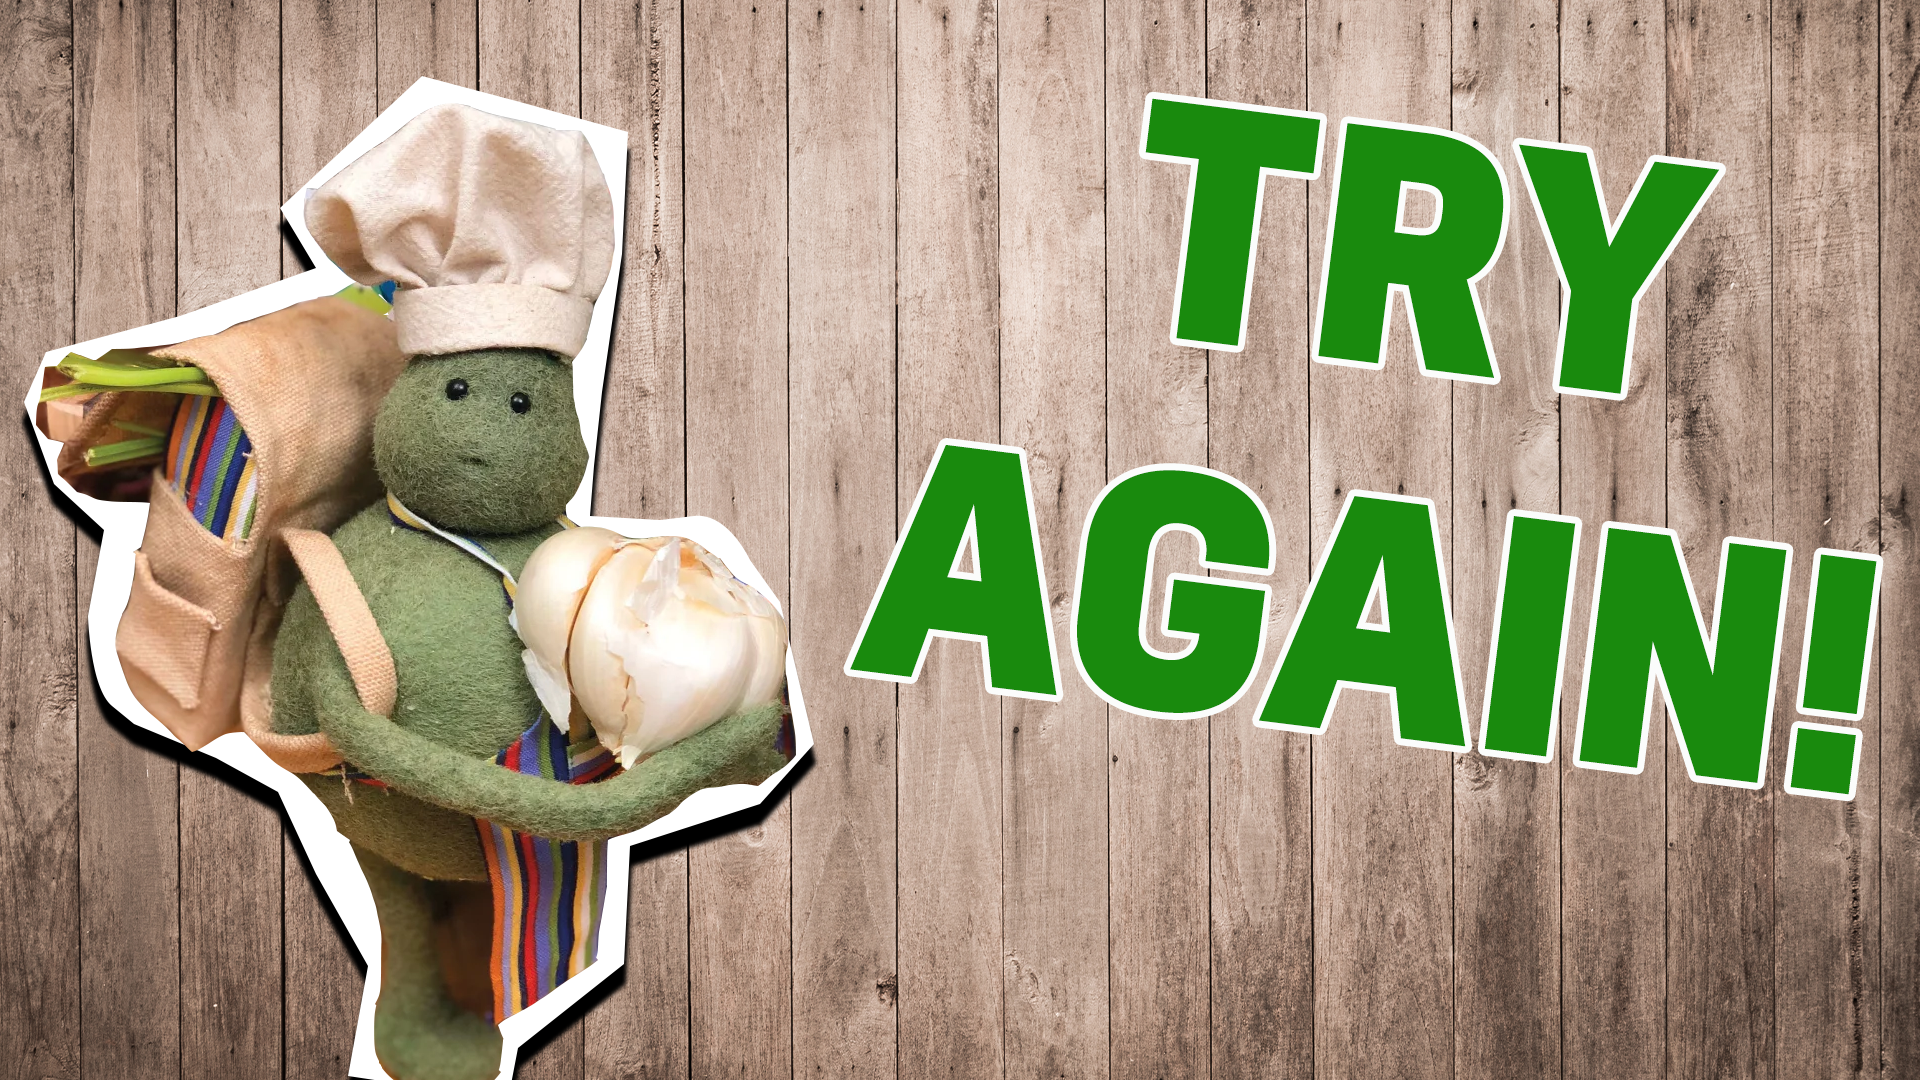 Try again! You nearly got a good score, but you'll need to know more about Tiny Chef than that!